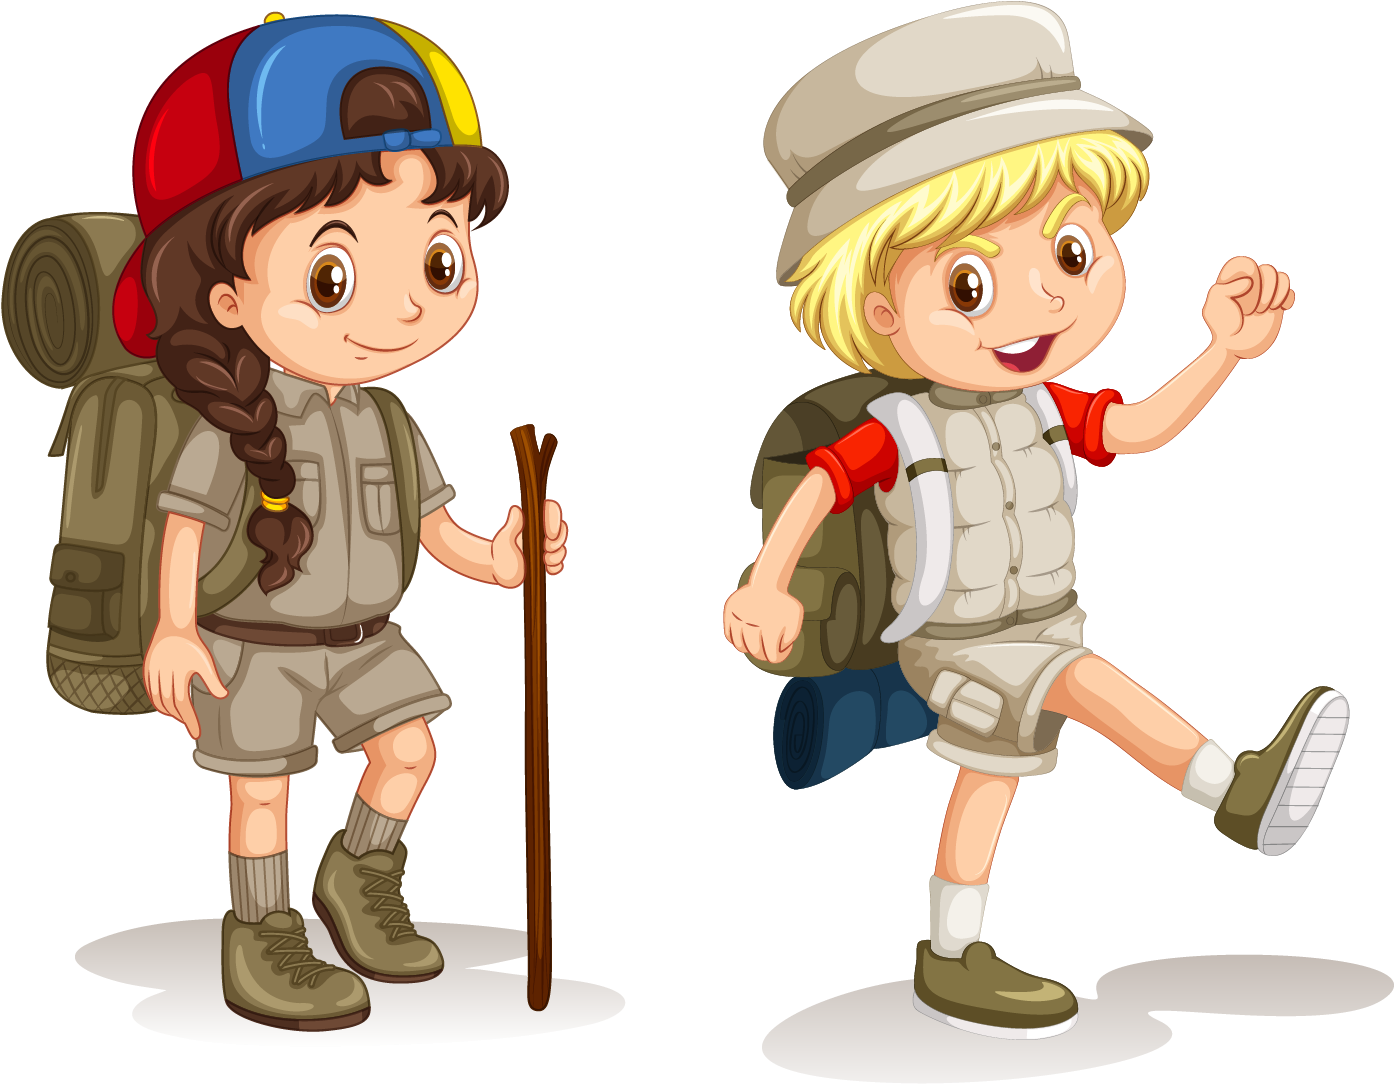 Camping Child Clip Art - Child Camp Vector - (1675x1417) Png Clipart Downlo...